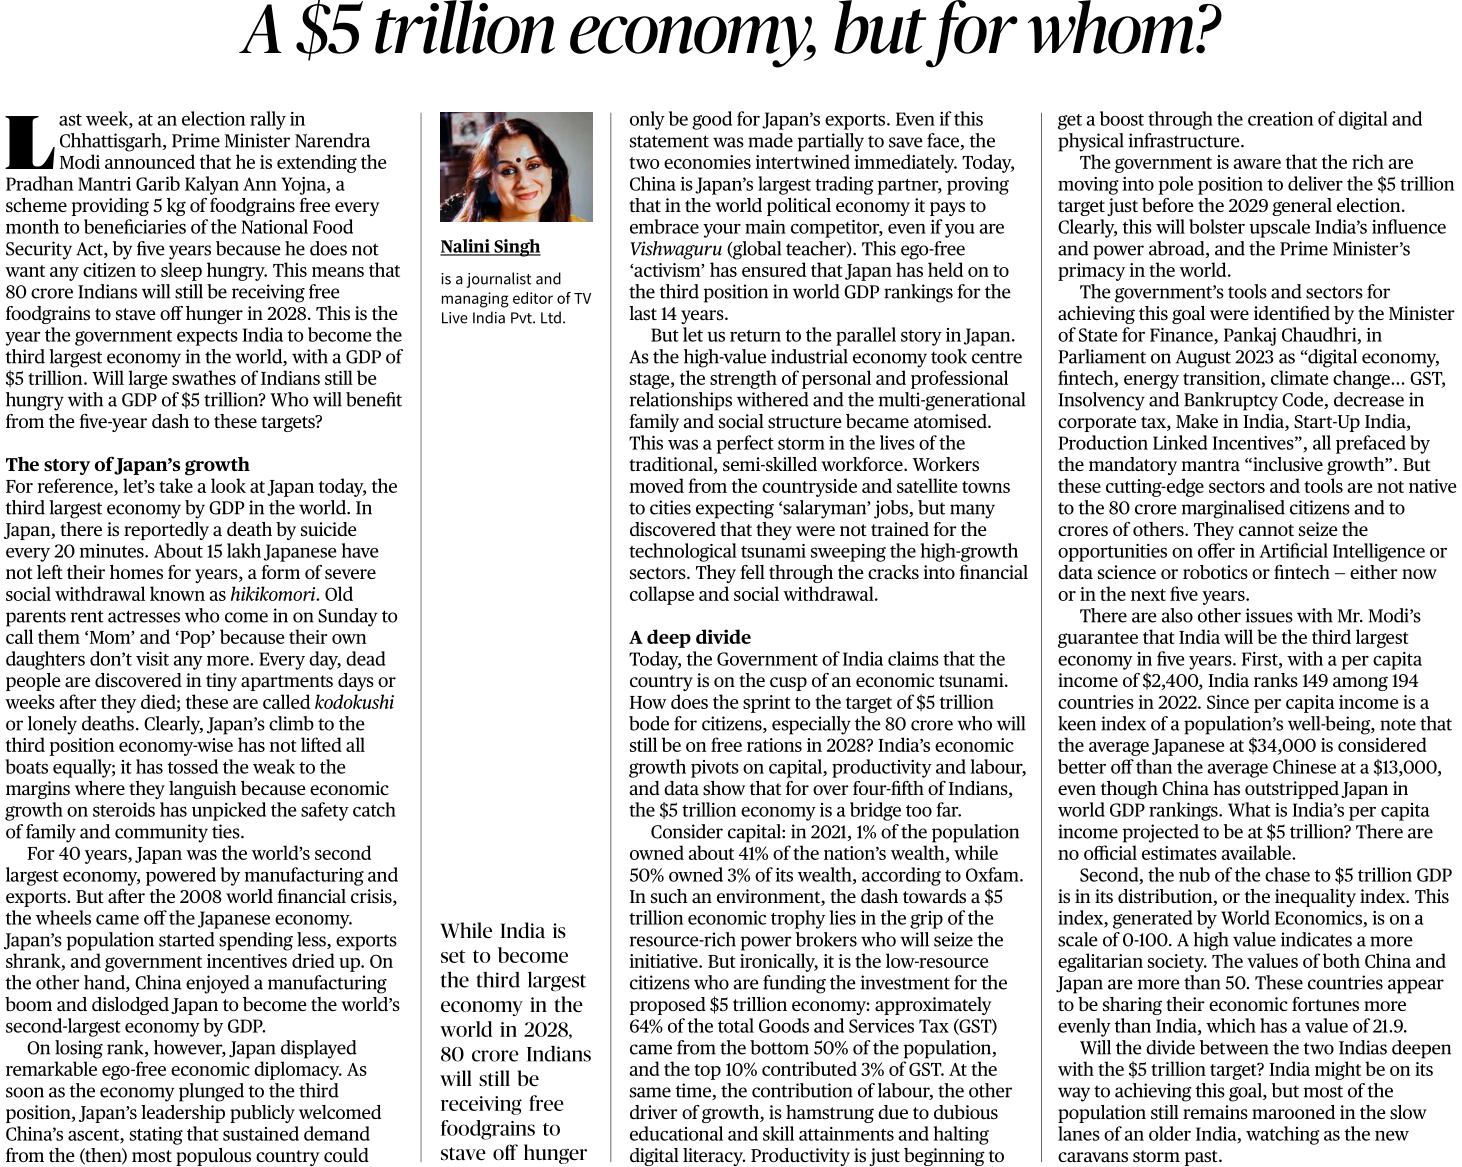 A $5 trillion economy, but for whom?- Page No.8 , GS 3